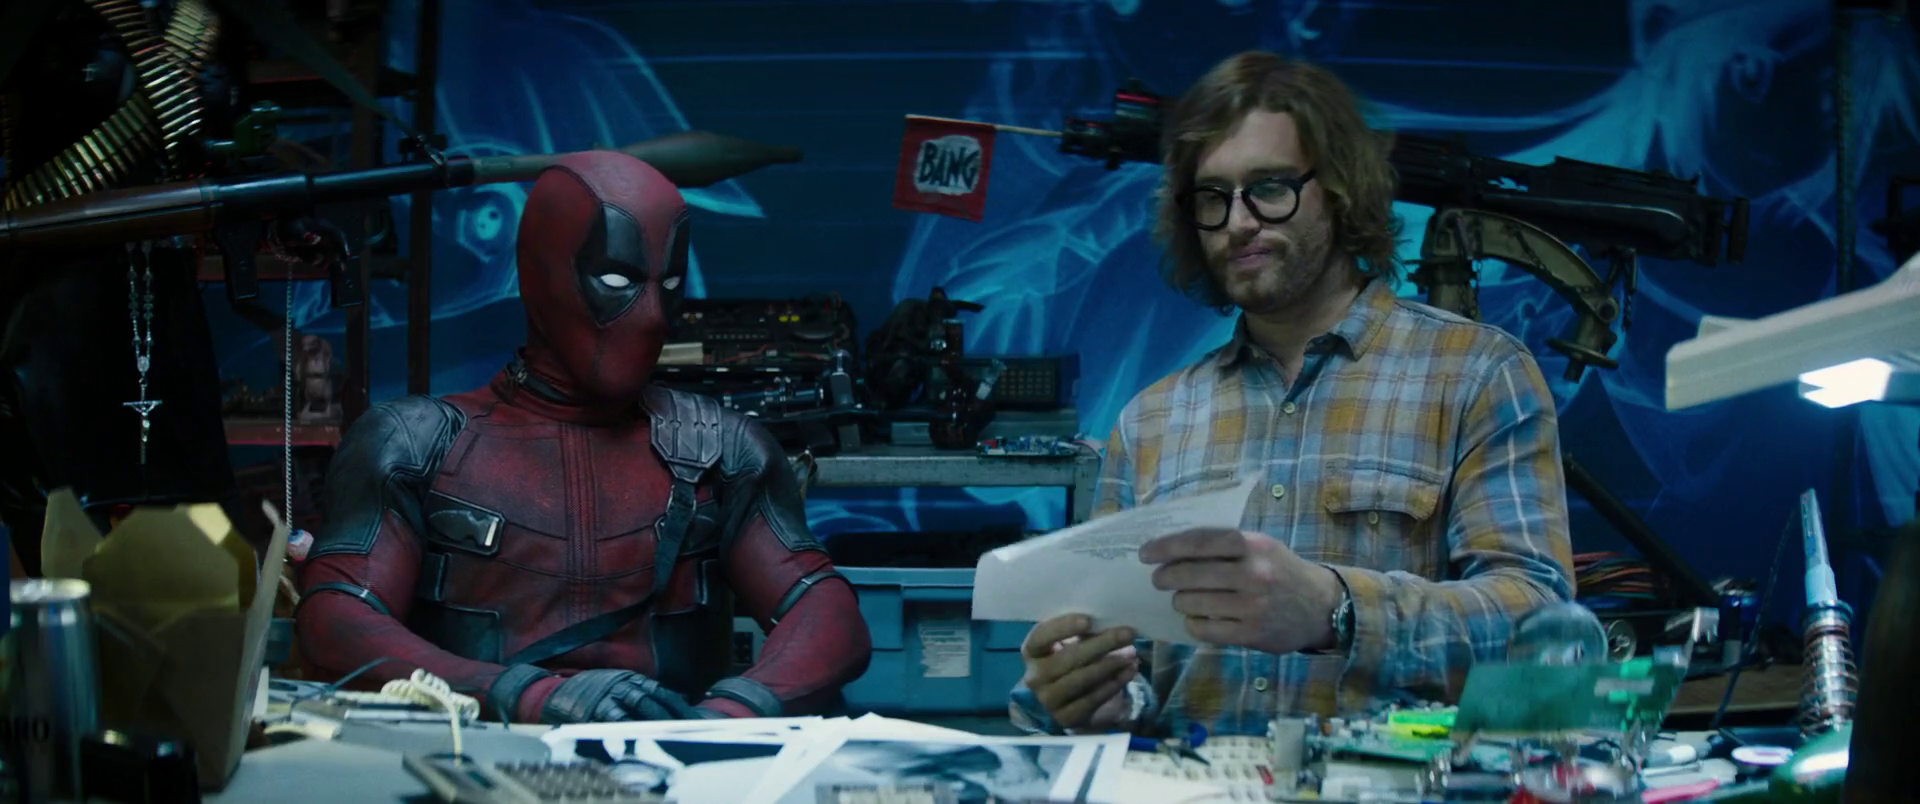 Deadpool (Ryan Reynolds) and Weasel (T.J. Miller) screen potential X-Force recruits in Deadpool 2 (2018), Marvel Entertainment